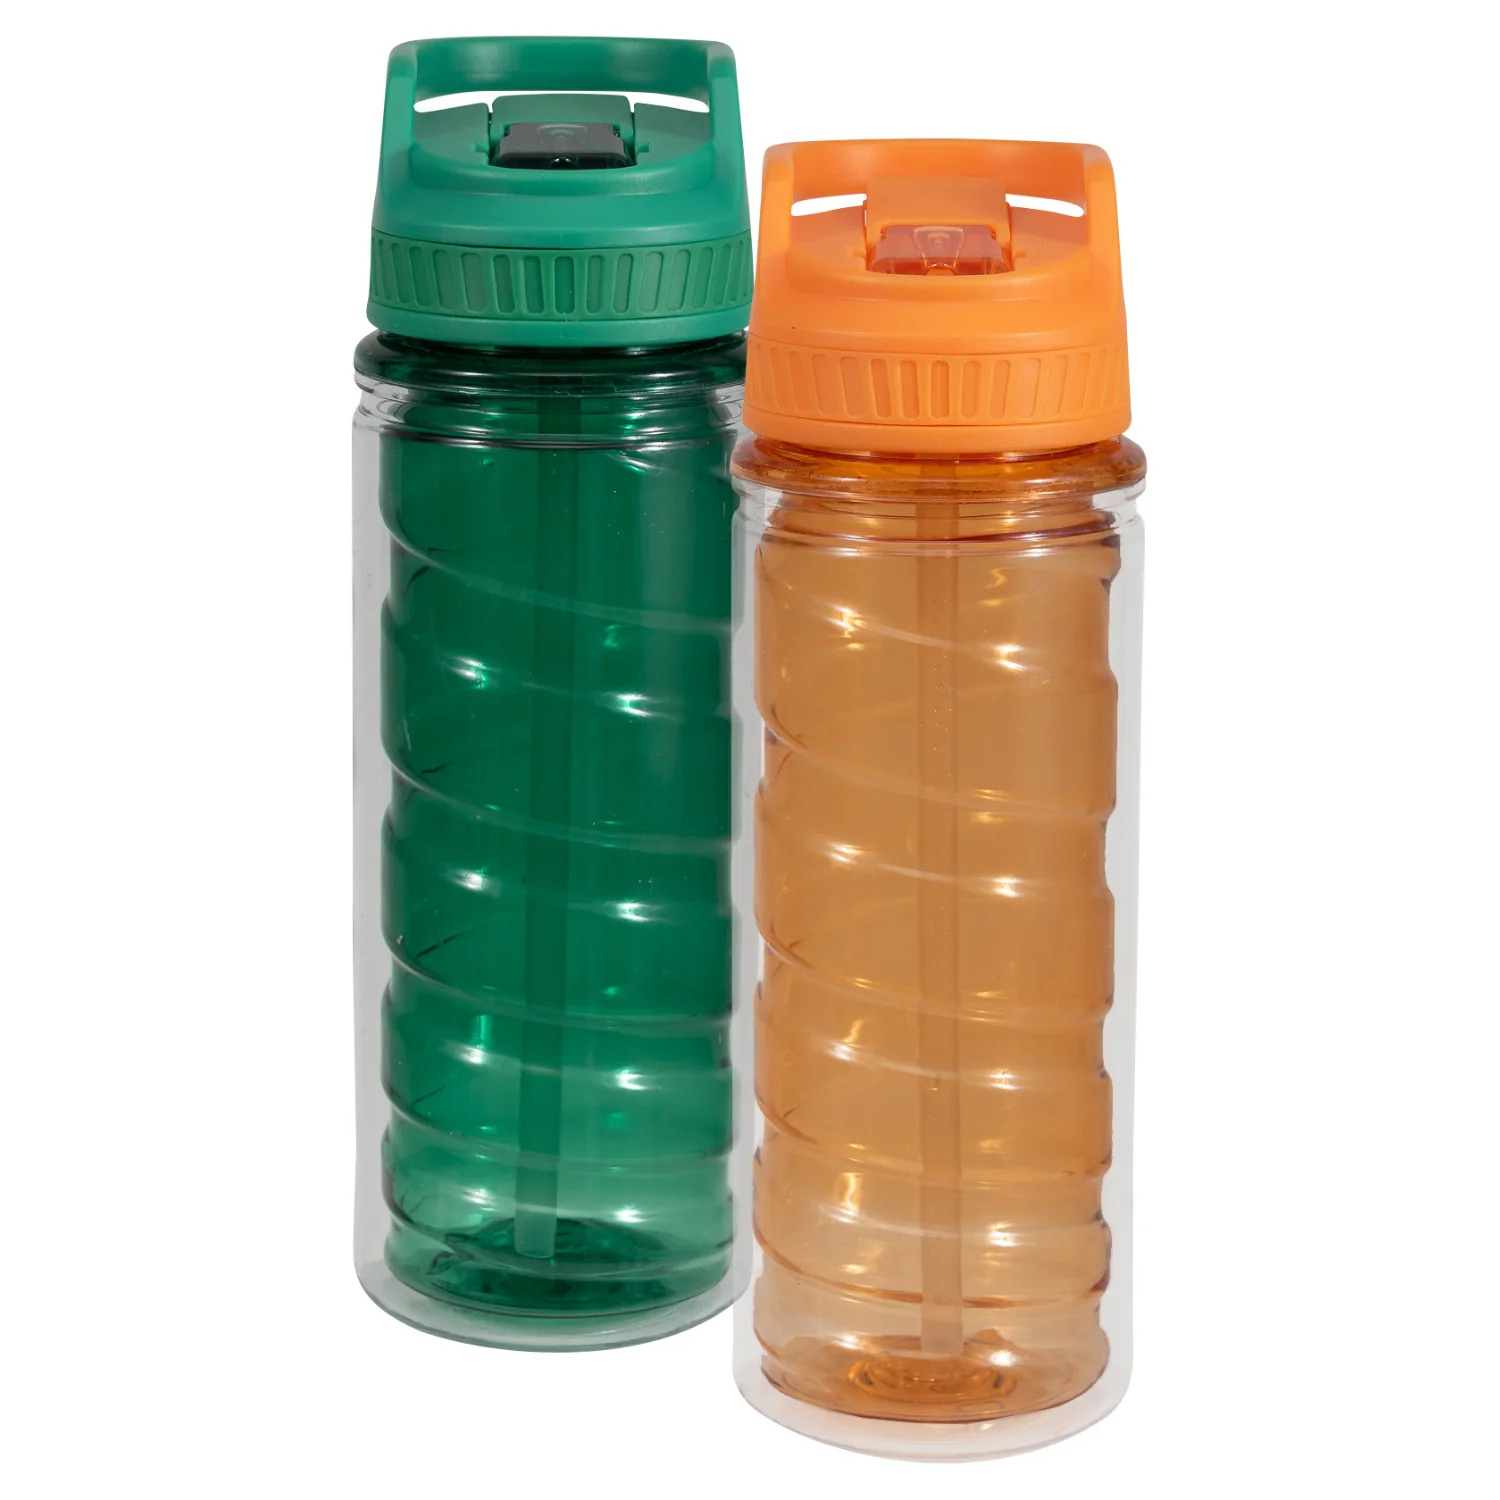 Cool Gear Tritan Twist Shatter Proof Water Bottle with Sipper Lid and Finger Loop Cap, 16 Ounce, 2 Packs - image 1 of 6